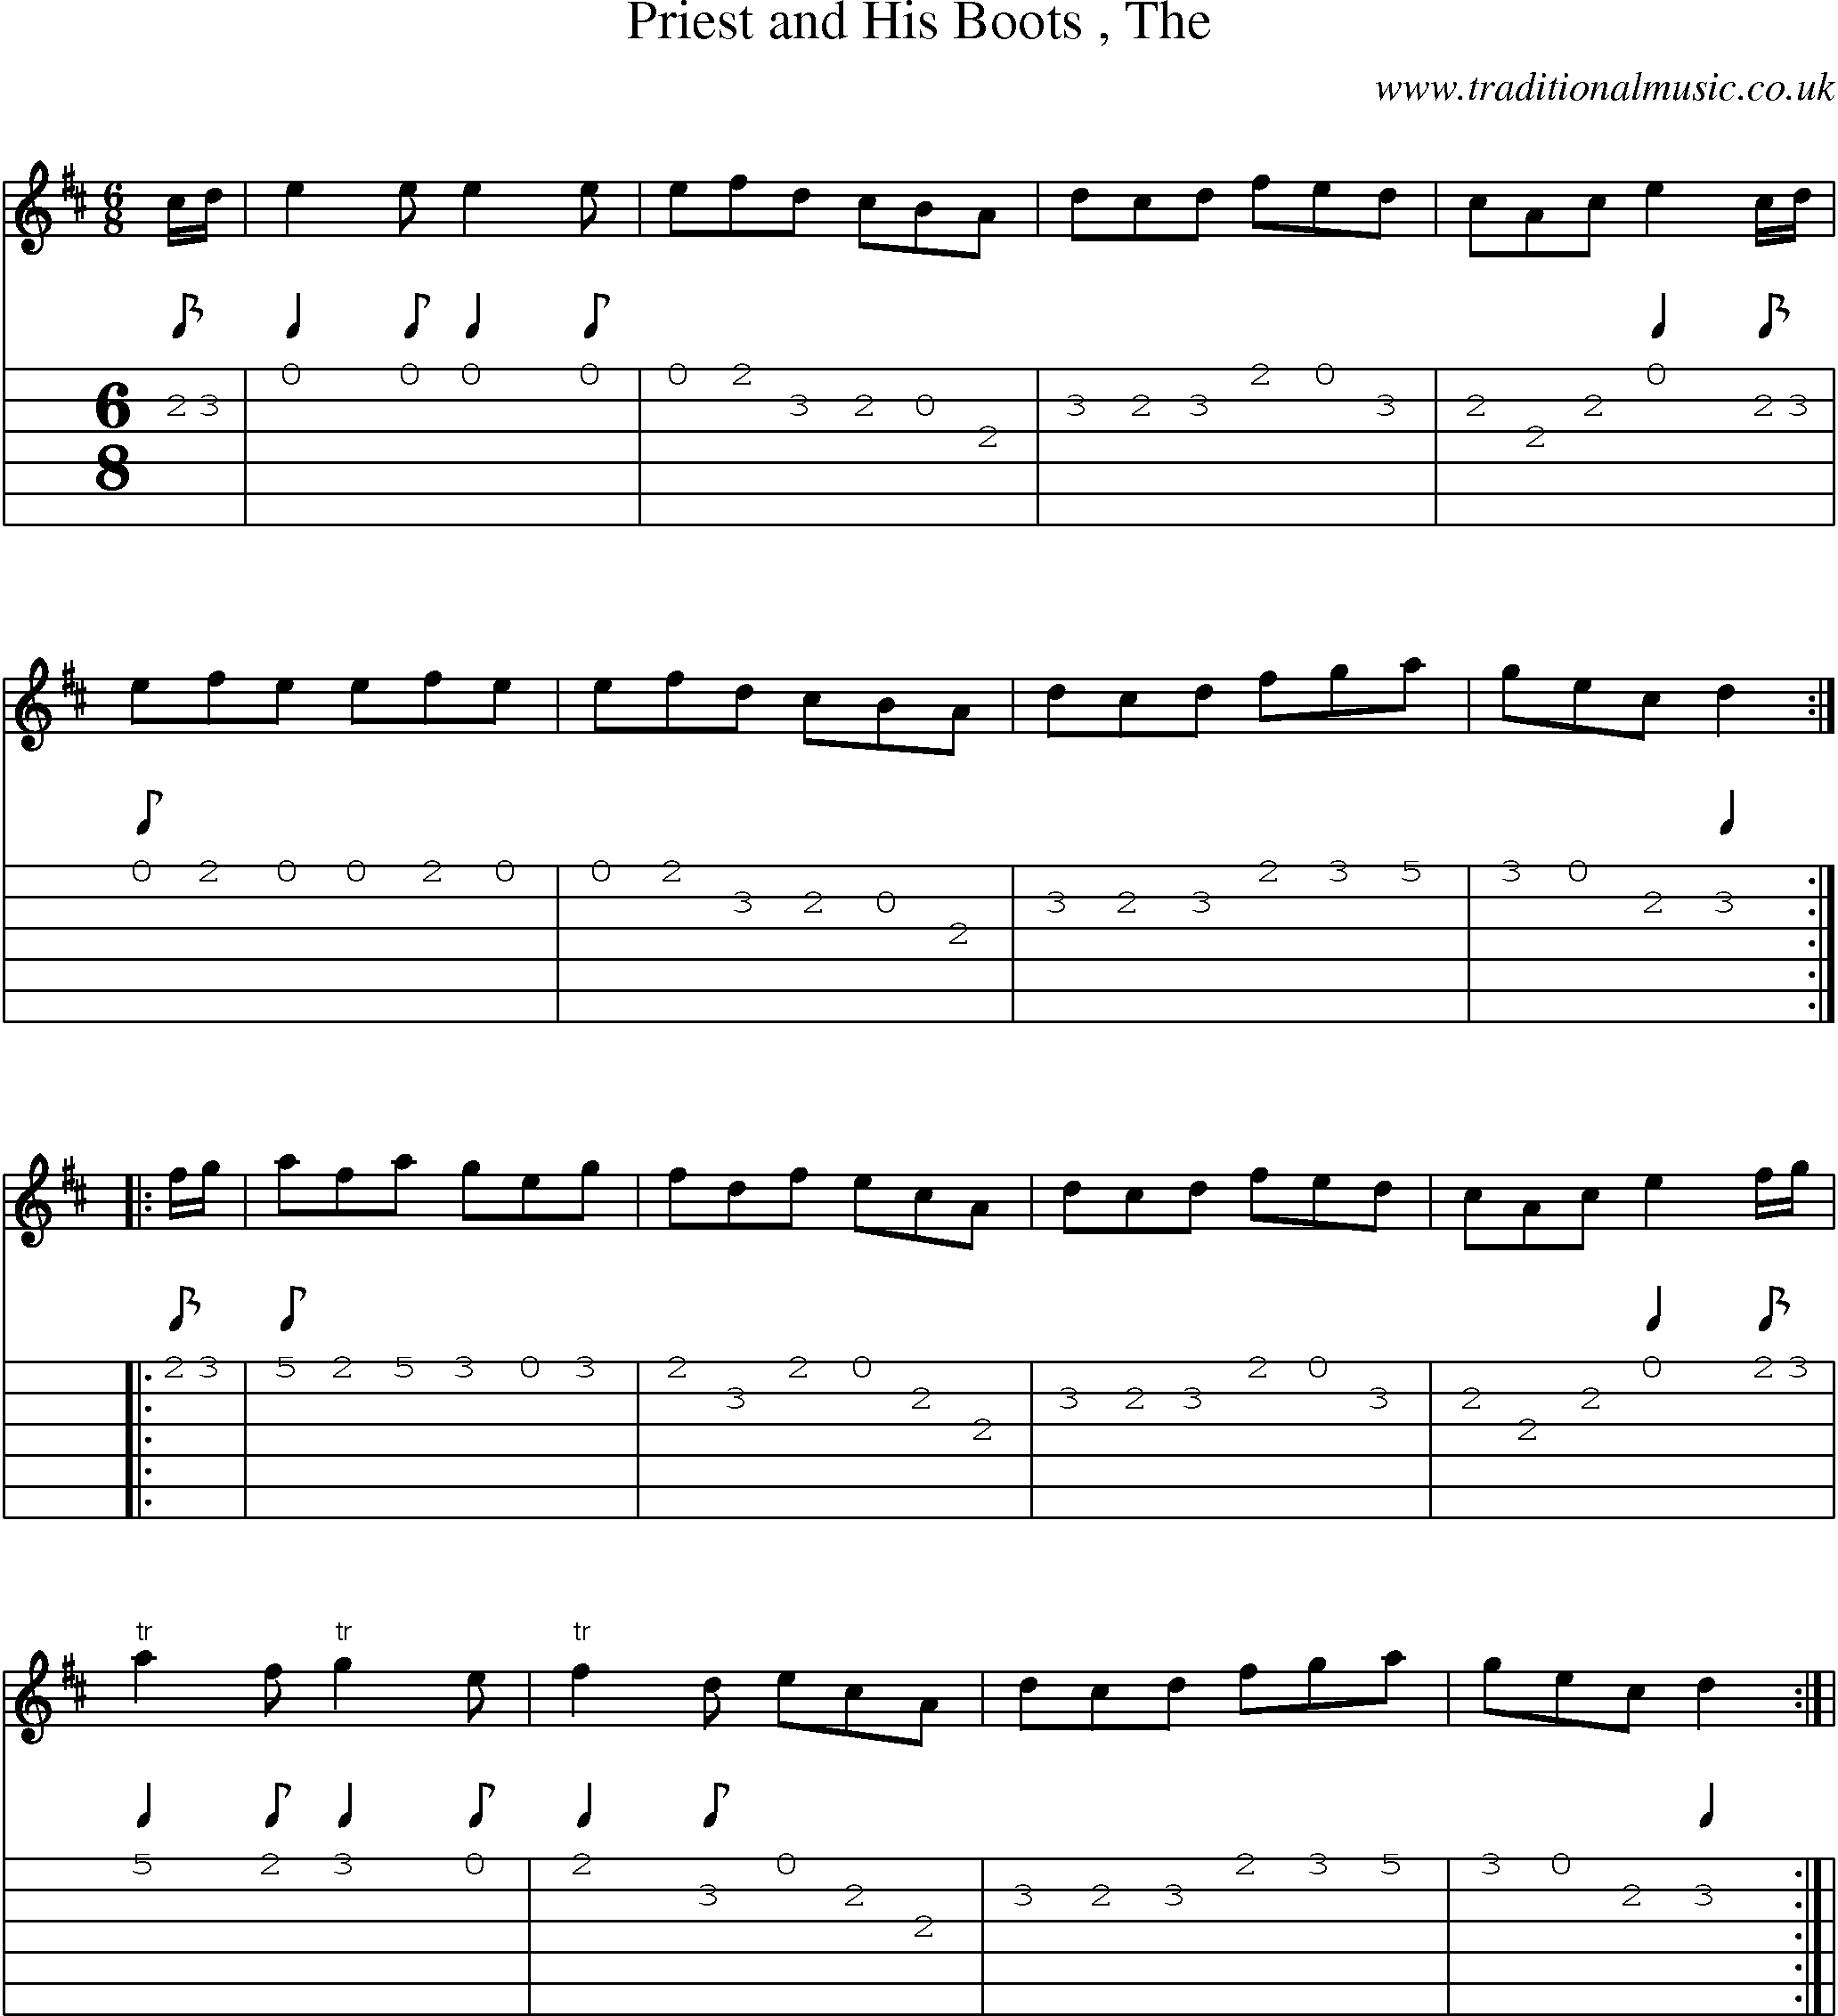 Music Score and Guitar Tabs for Priest And His Boots